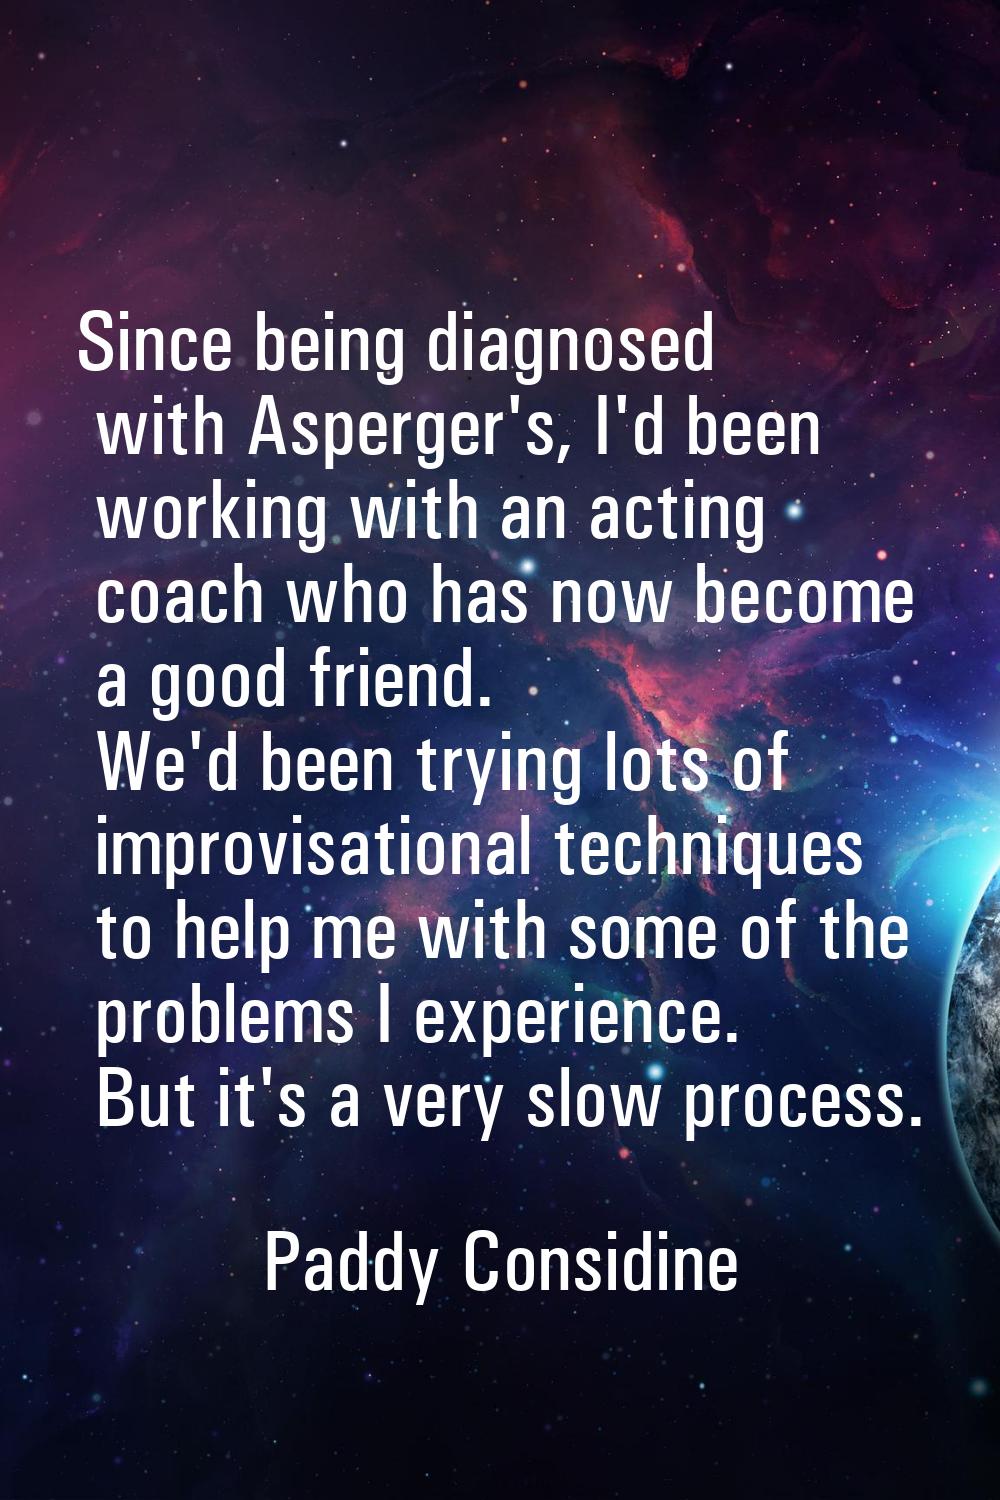 Since being diagnosed with Asperger's, I'd been working with an acting coach who has now become a g